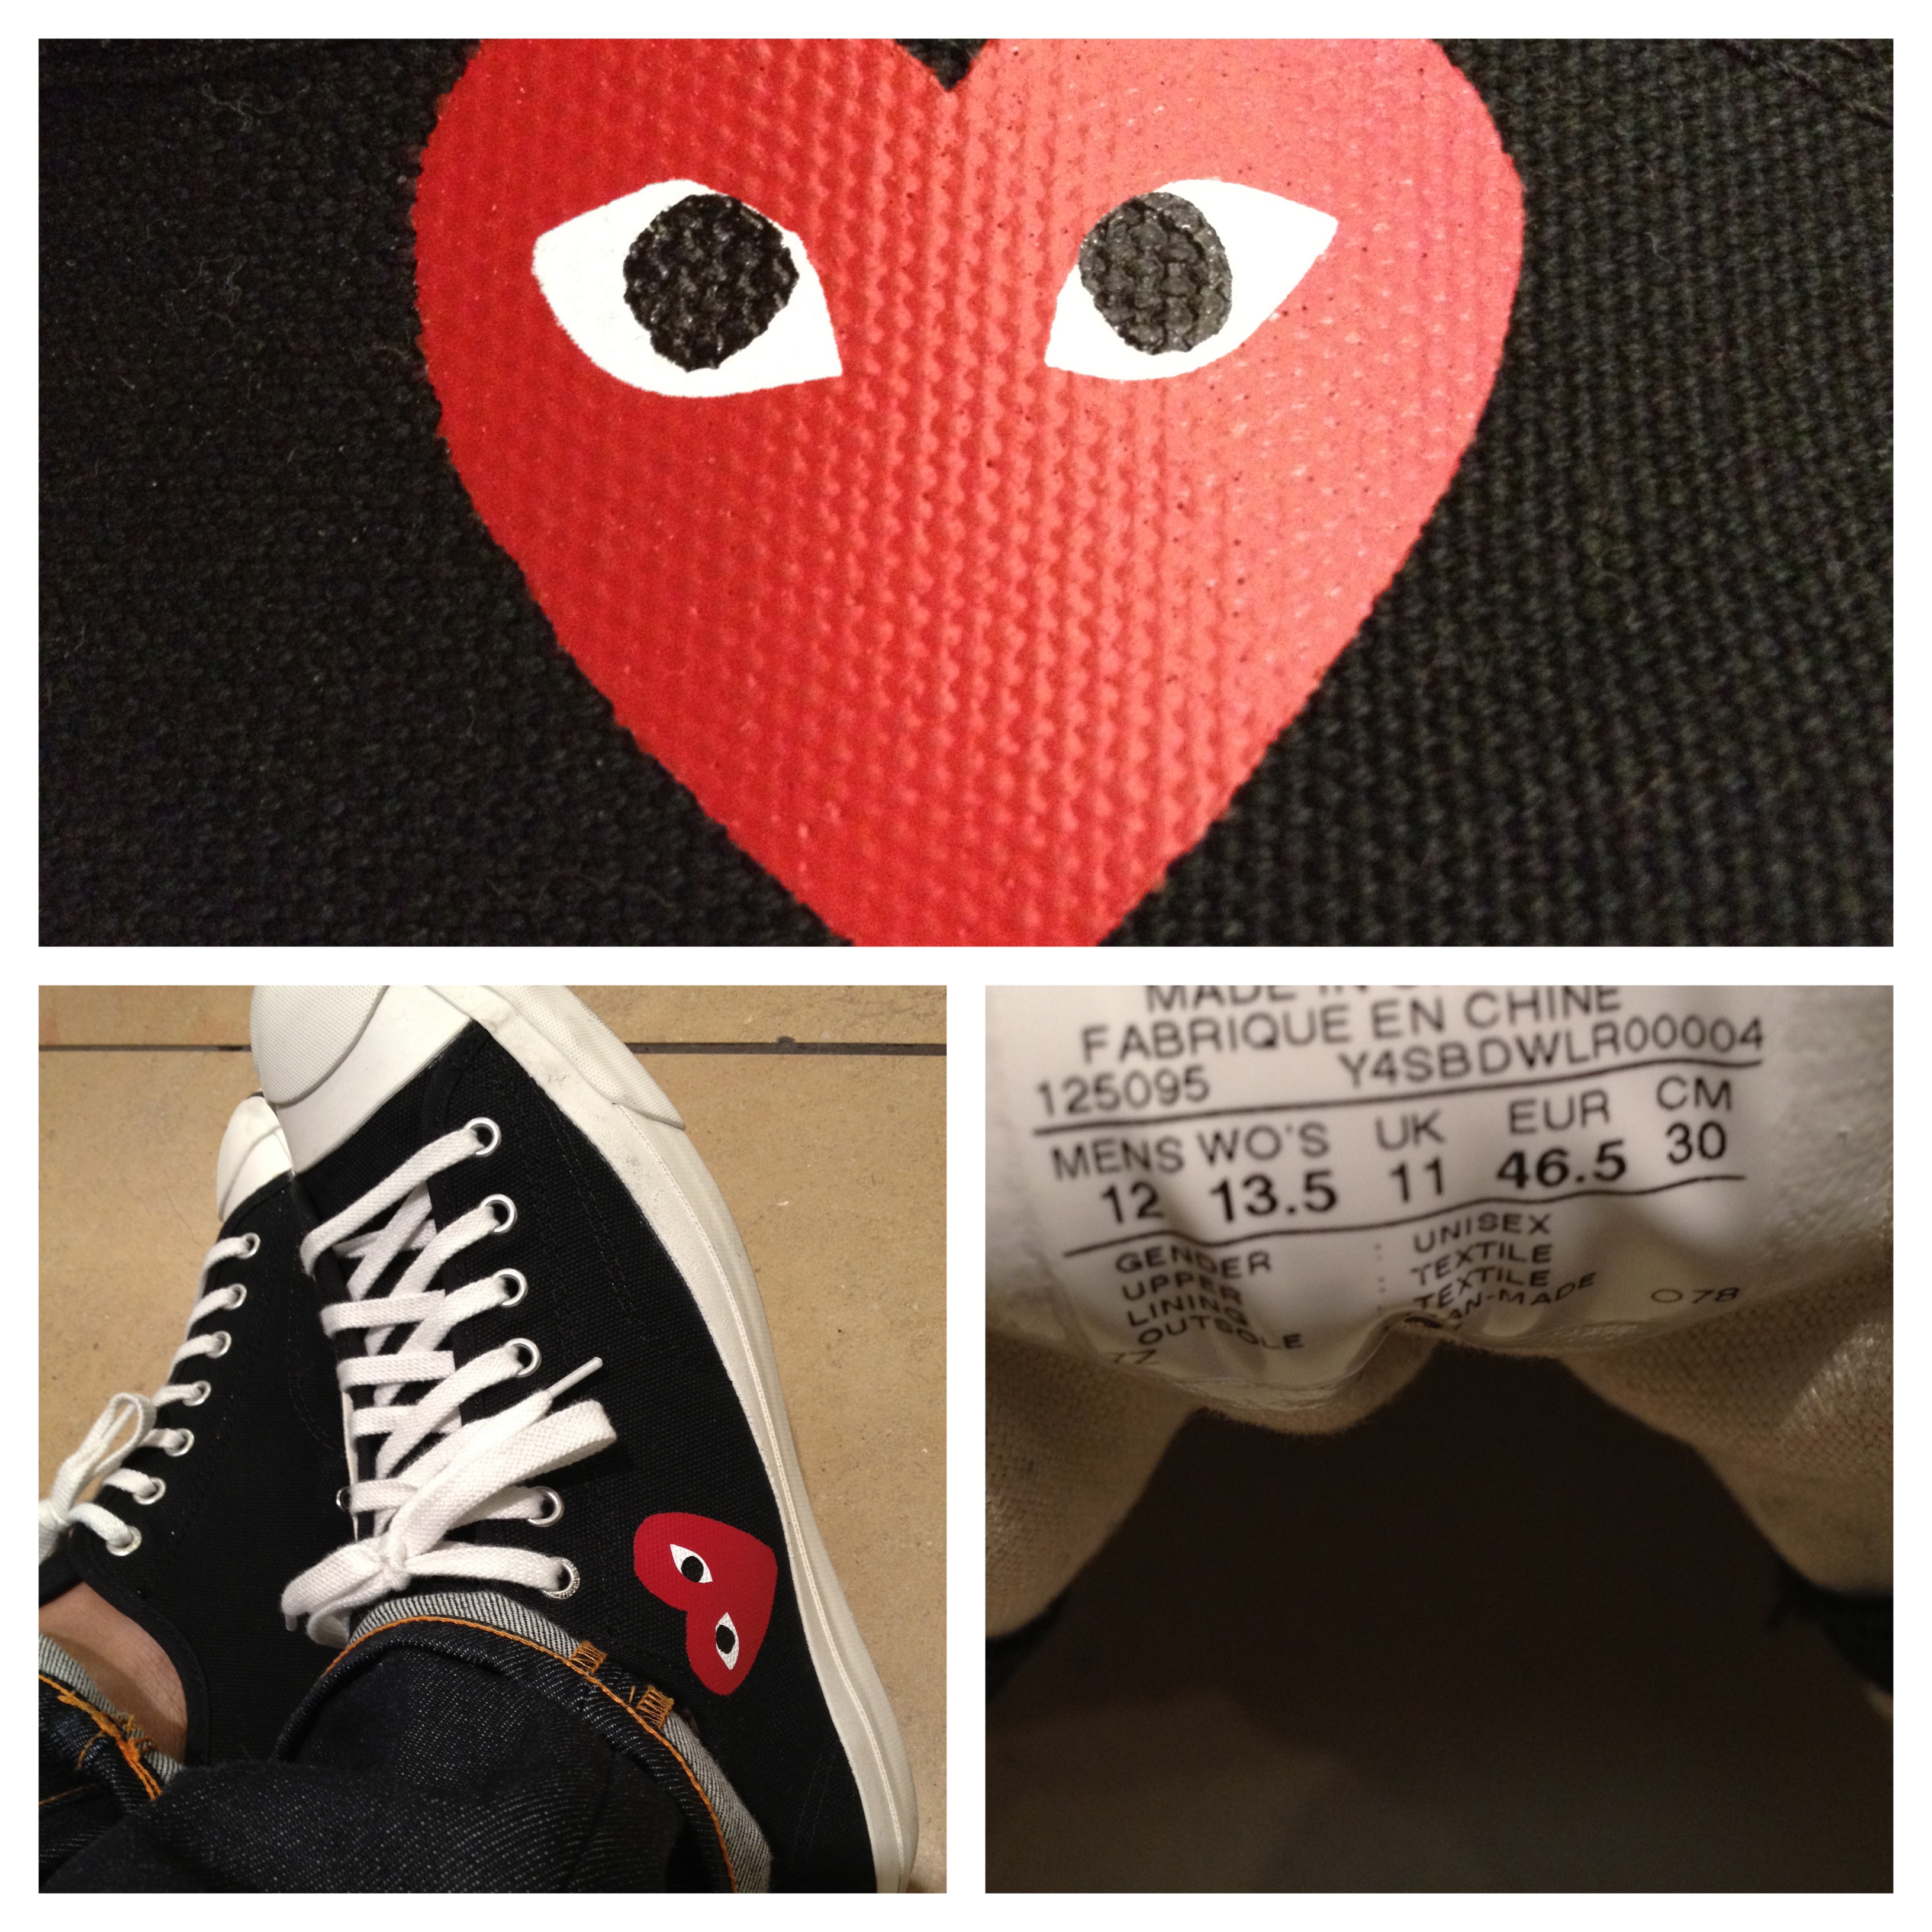 size 12 cdg converse